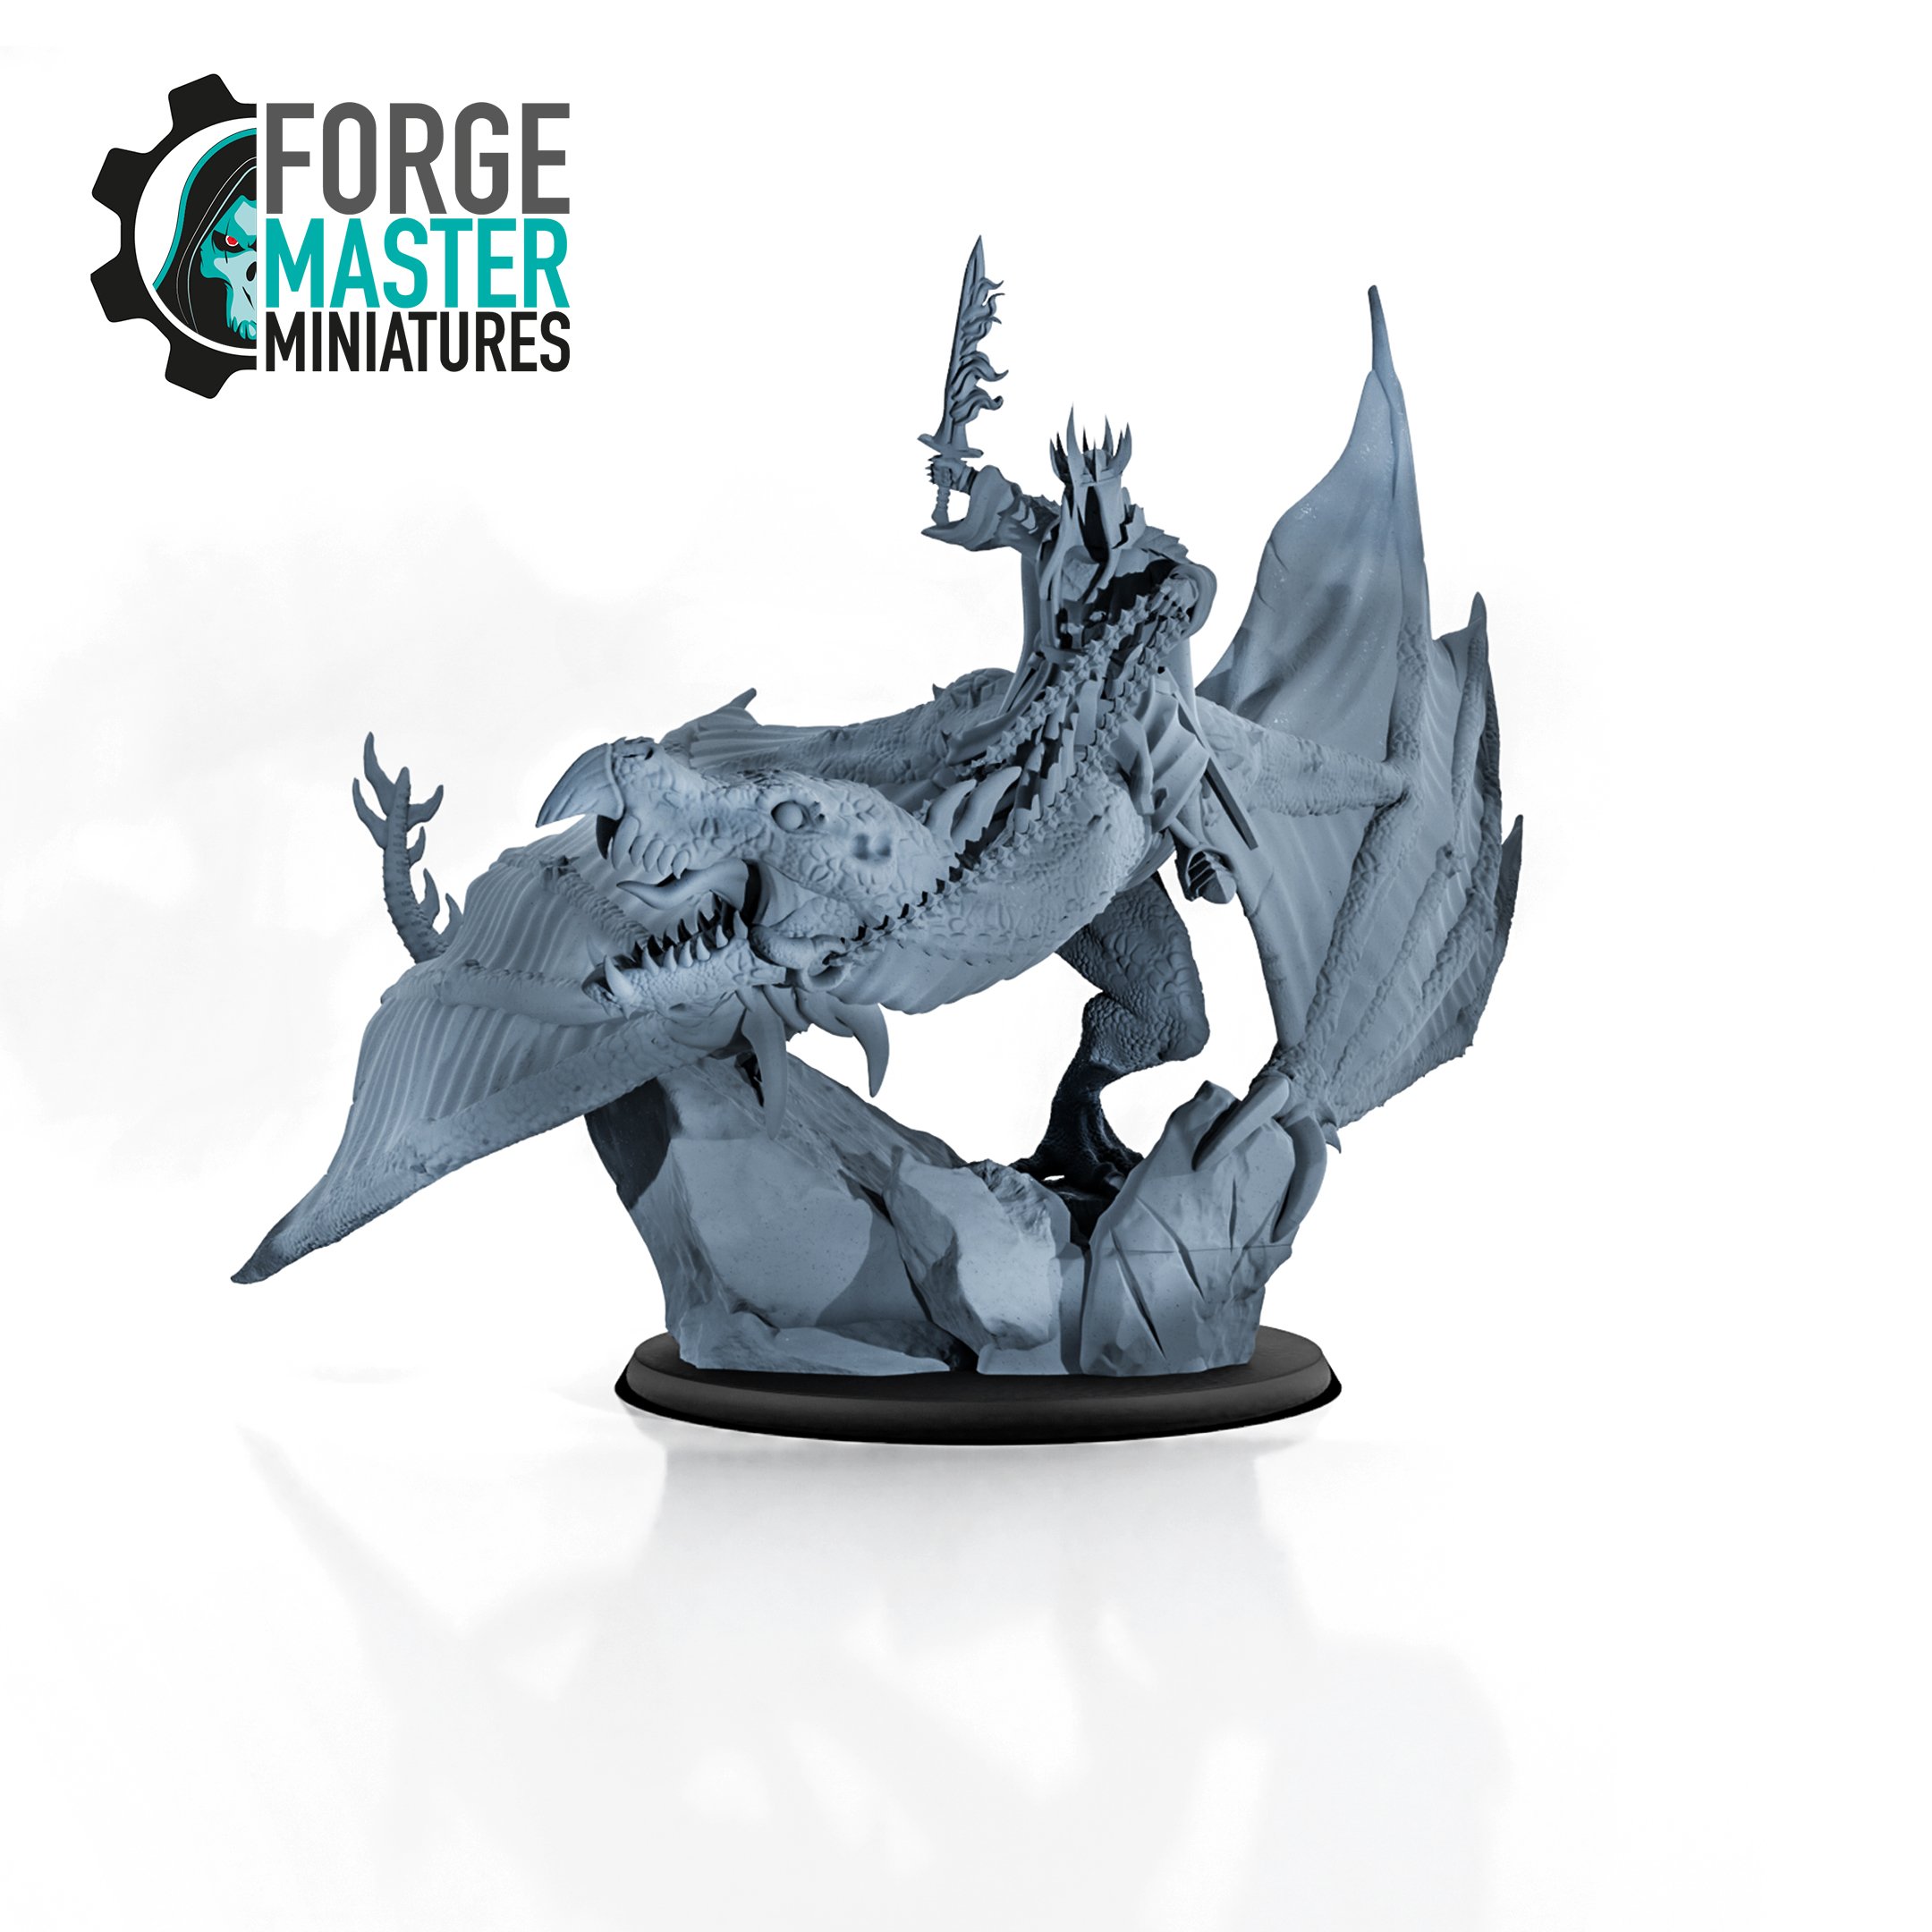 Wraith King on Winged Shadow wargaming miniature by Kzk Minis 3D printed by Forgemaster Miniatures